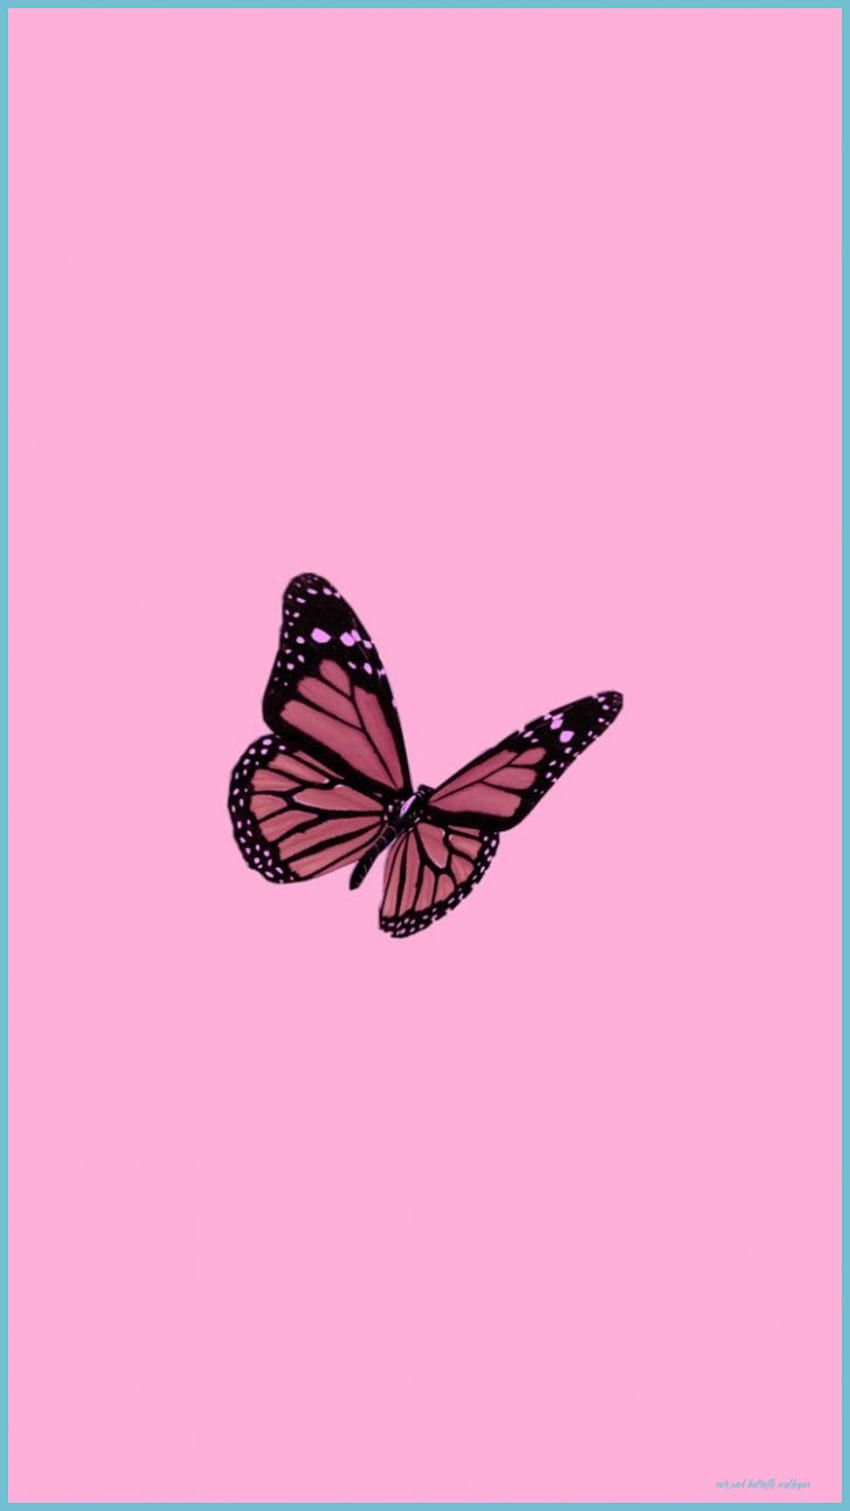 Aesthetic butterfly wallpaper for your phone or desktop computer. - Butterfly